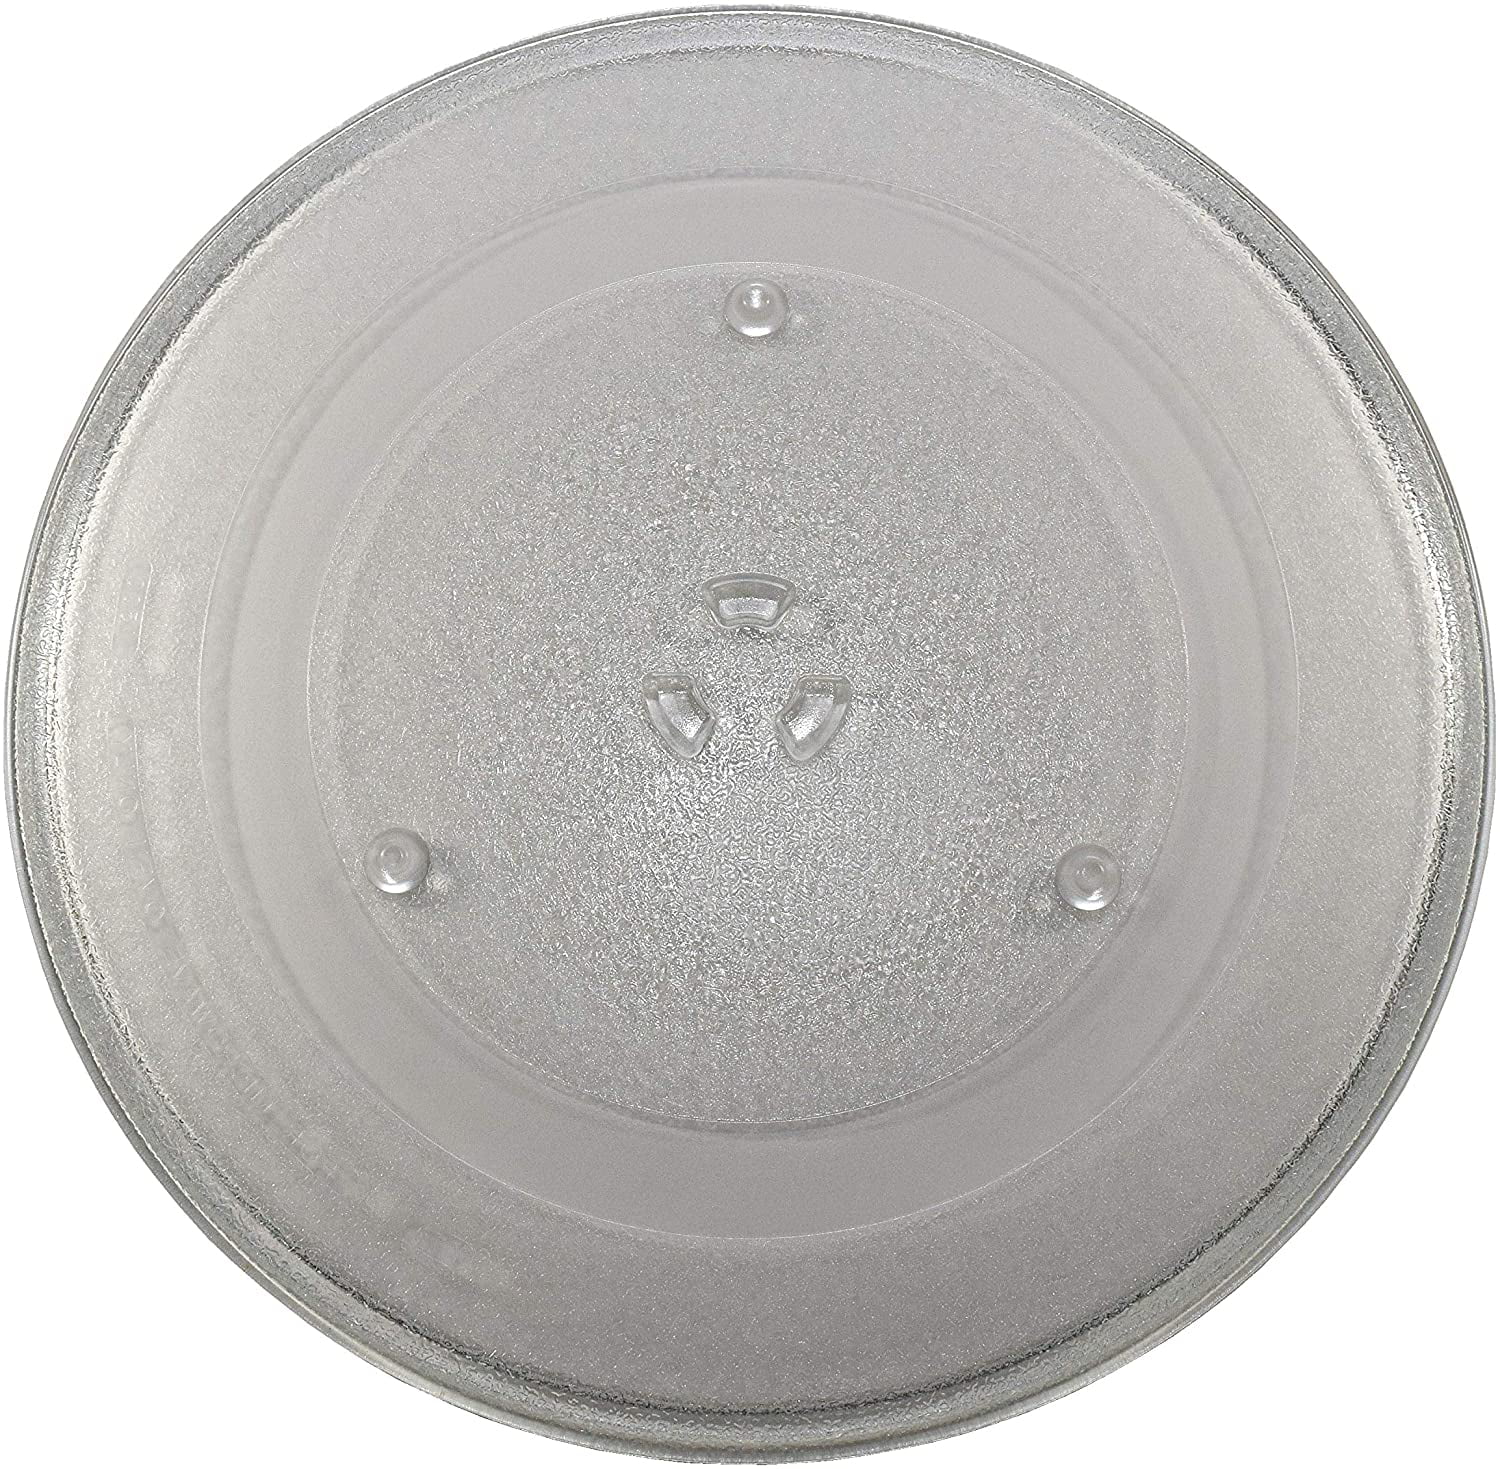 HQRP 12.5-inch Glass Turntable Tray for GE Microwave Oven Cooking Plate 318mm 